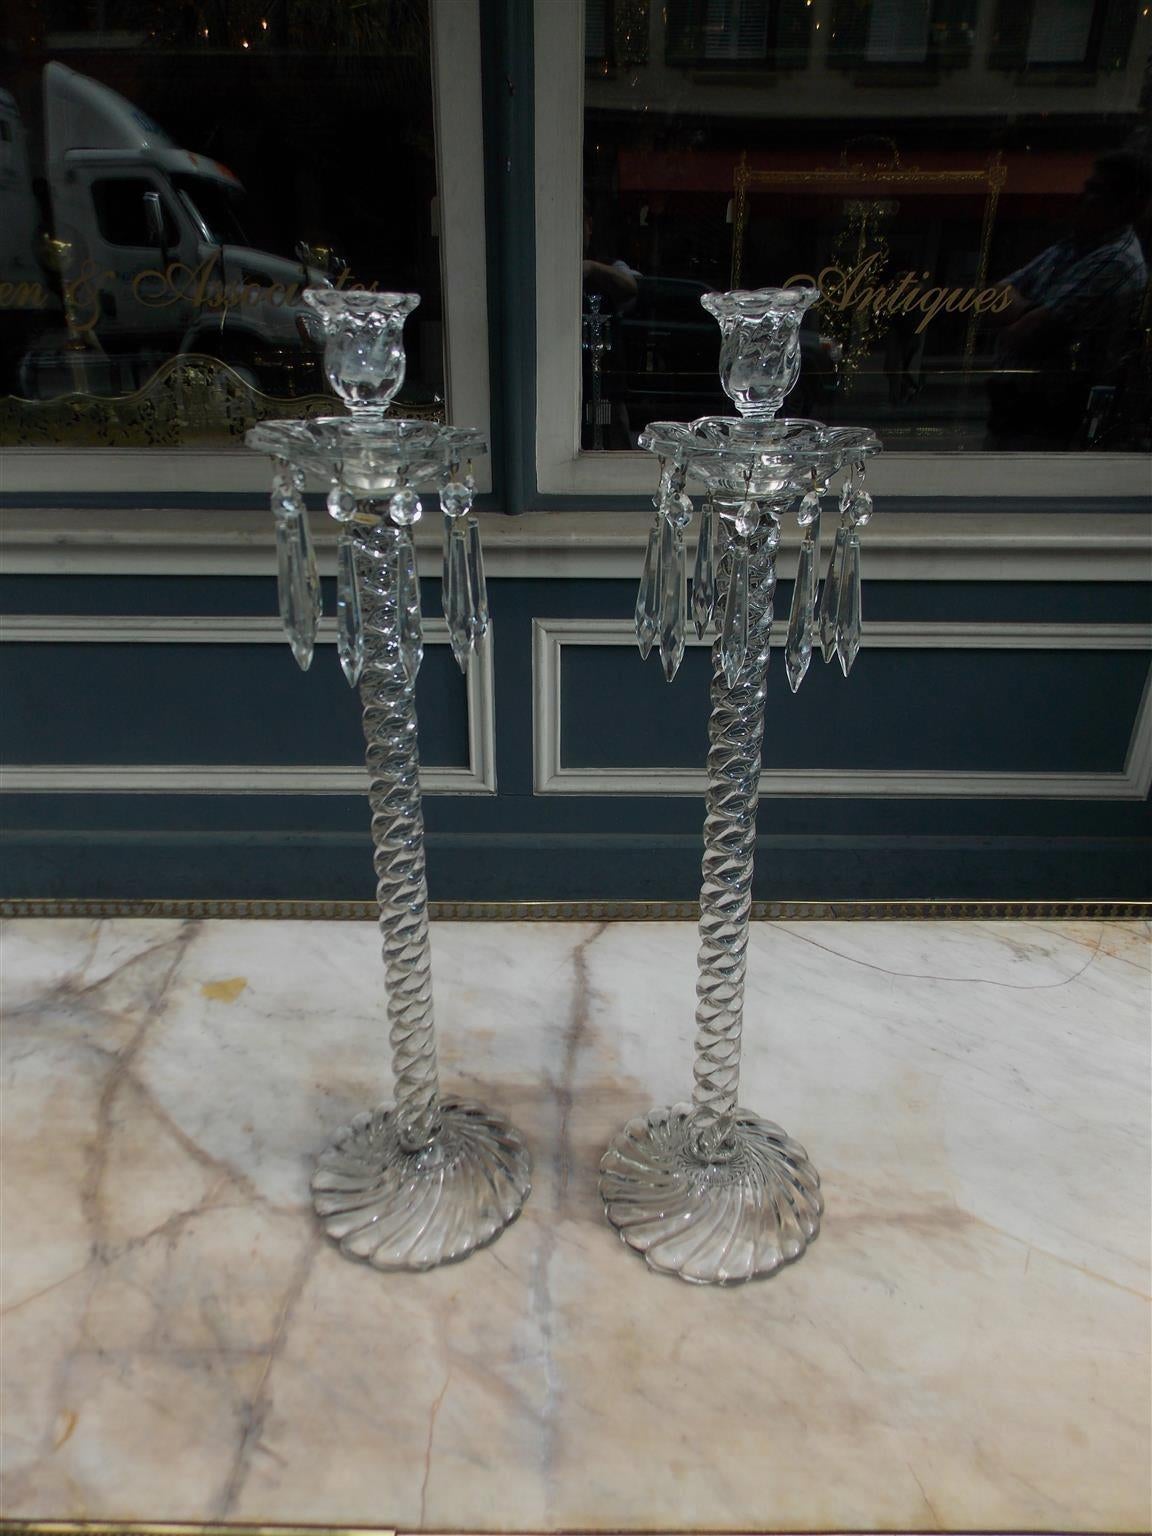 Pair of tall American Fostoria baccarat style crystal candlesticks with prism bobaches, spiral columns, and terminating on circular spiral base, Early 20th Century.